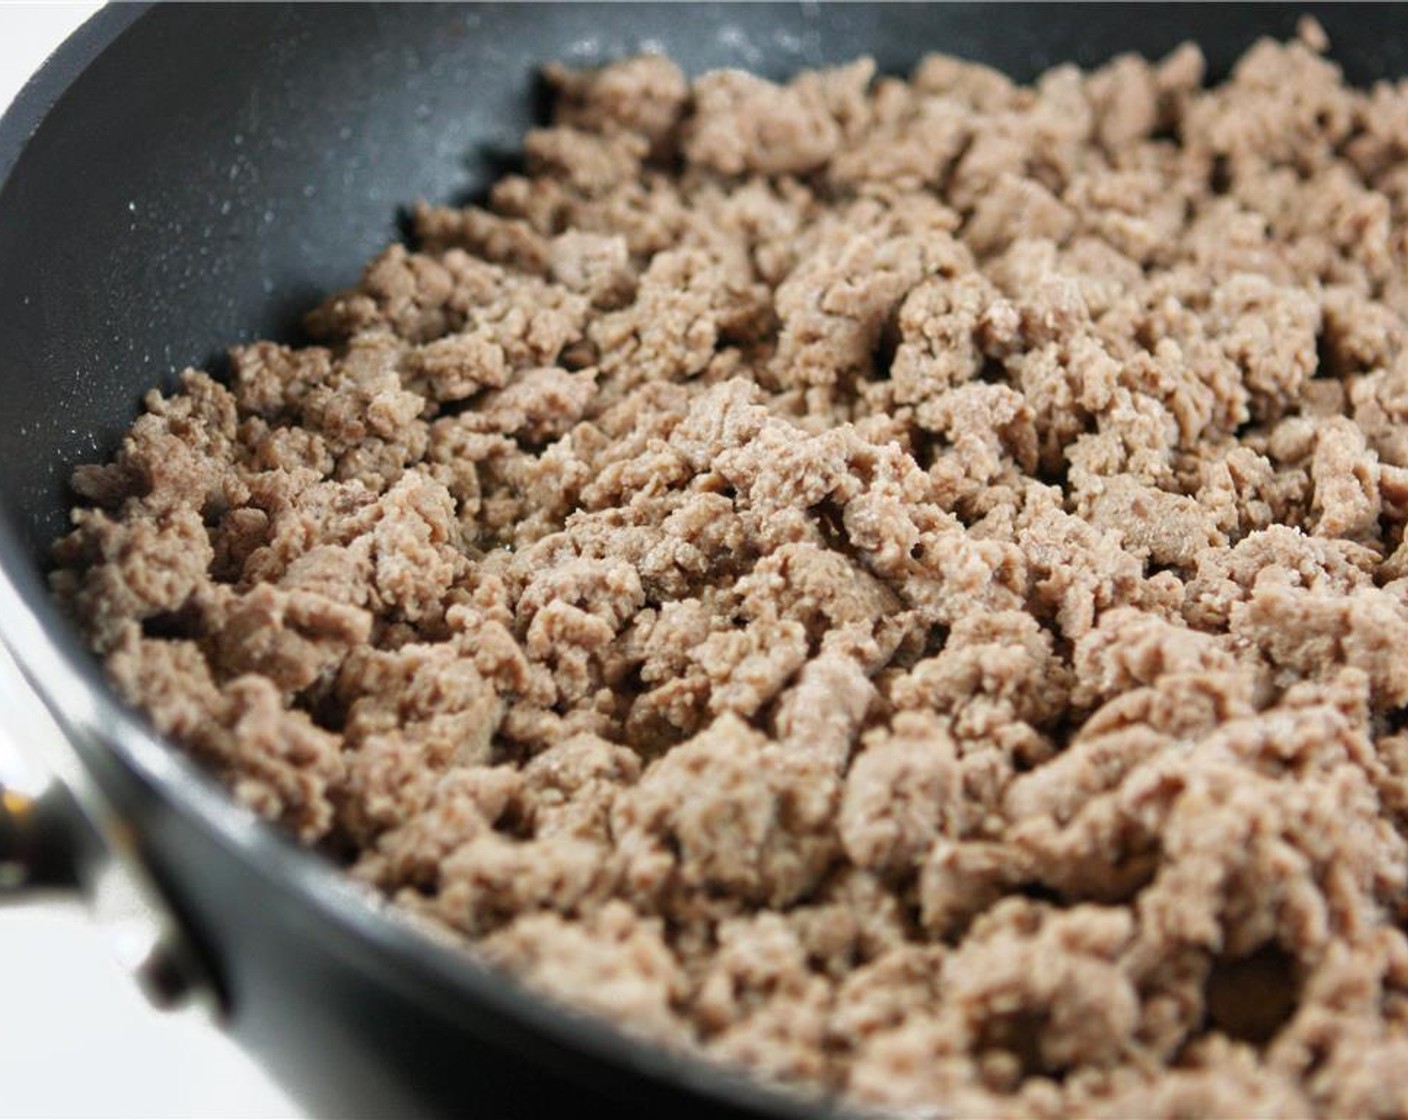 step 1 In a large skillet, cook Ground Beef (2 lb) over medium-high heat until no longer pink. Transfer the meat to a bowl. Drain excess grease from the skillet, but do not clean.